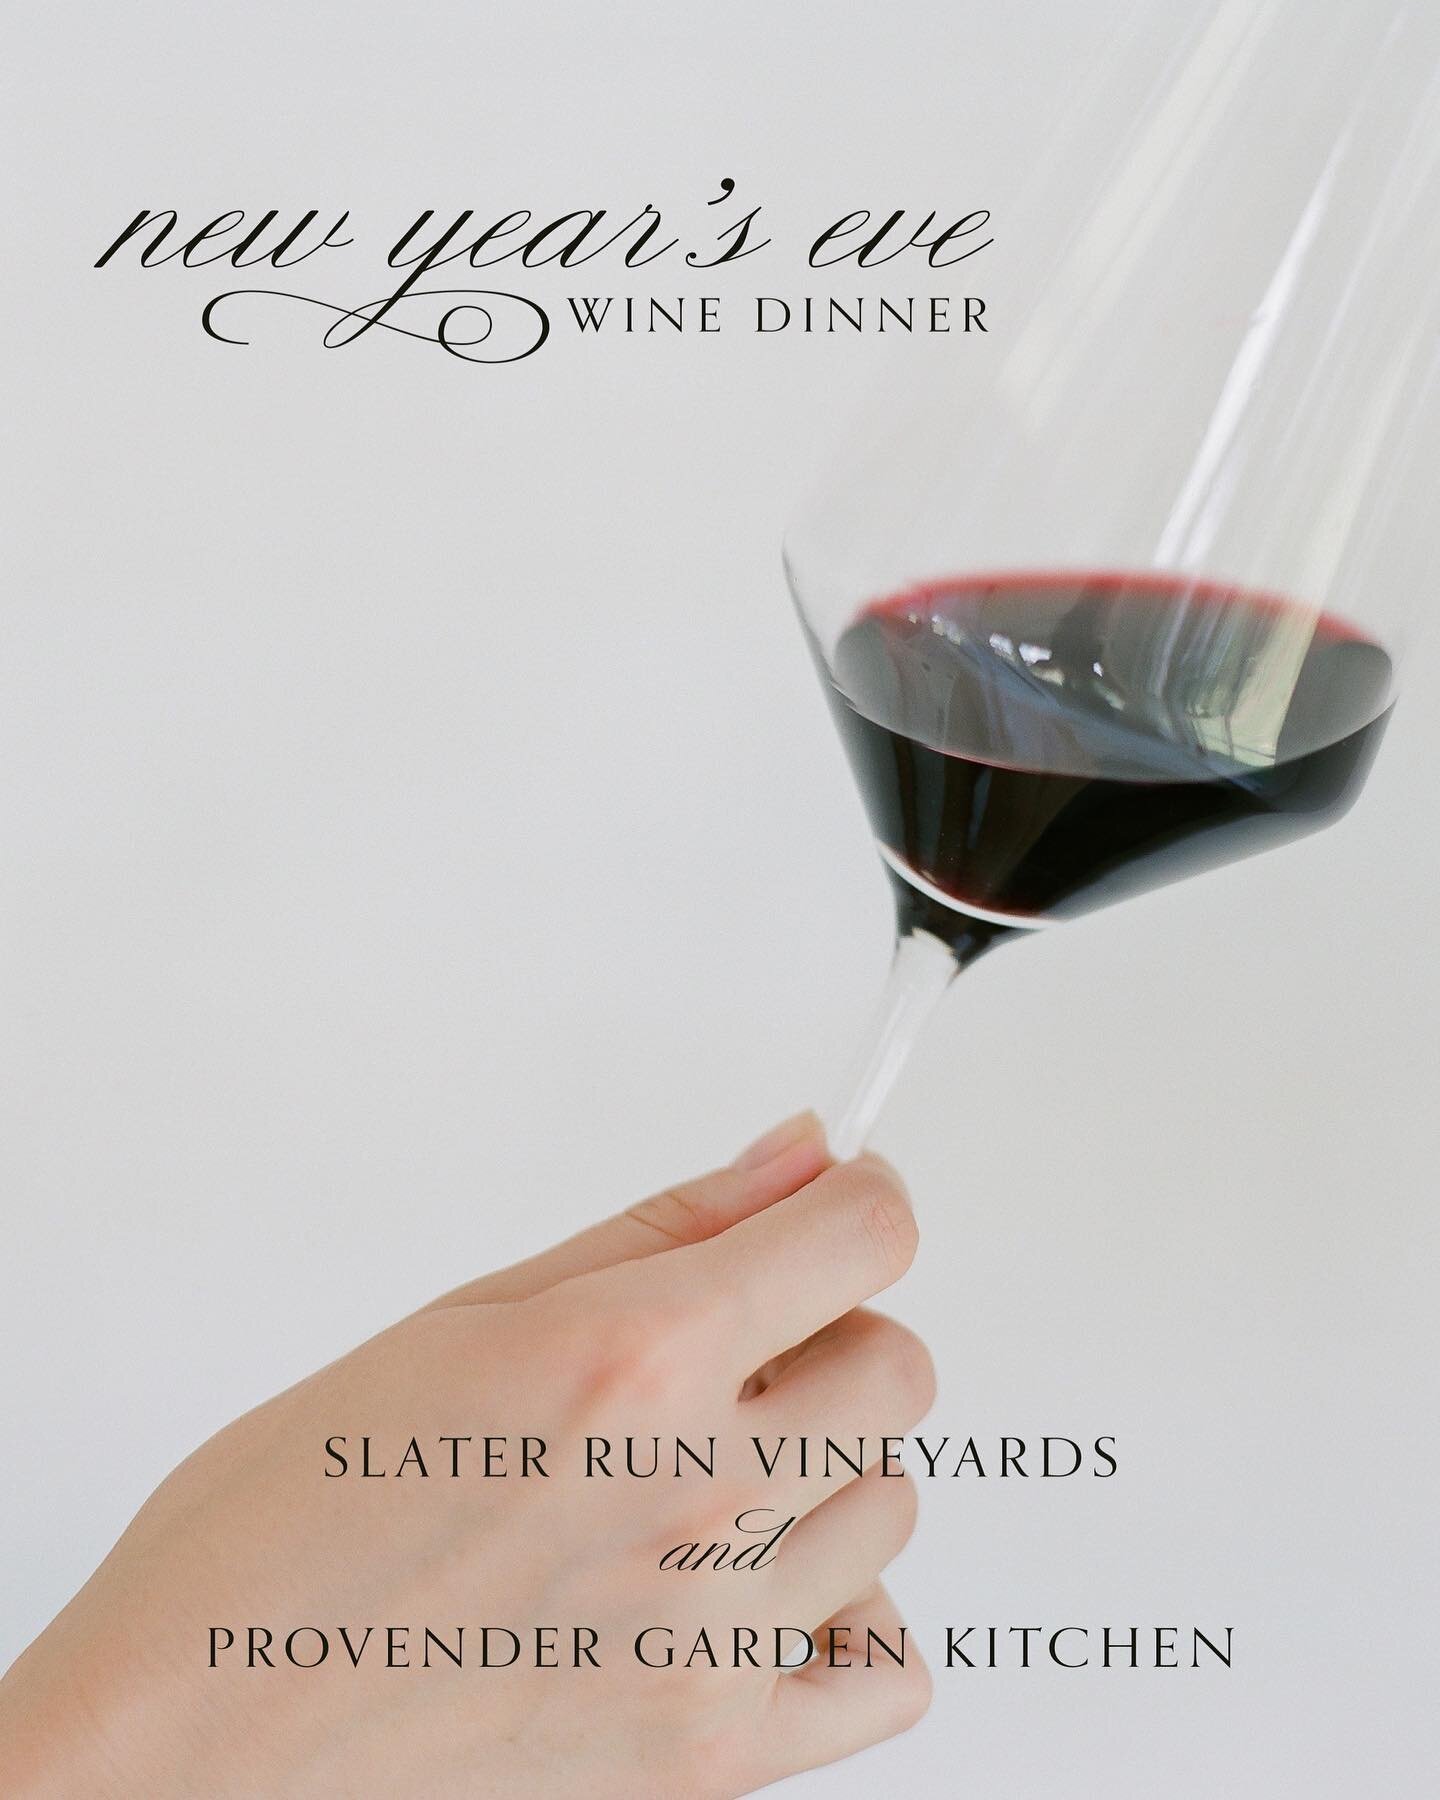 Let&rsquo;s ring in the new year together! 🥂

We are excited to partner with @slaterrunvineyard for an exclusive event on December 31st.  Join us in their tasting room for a five course dinner paired with a selection of Slater Run wines 🍴

For more